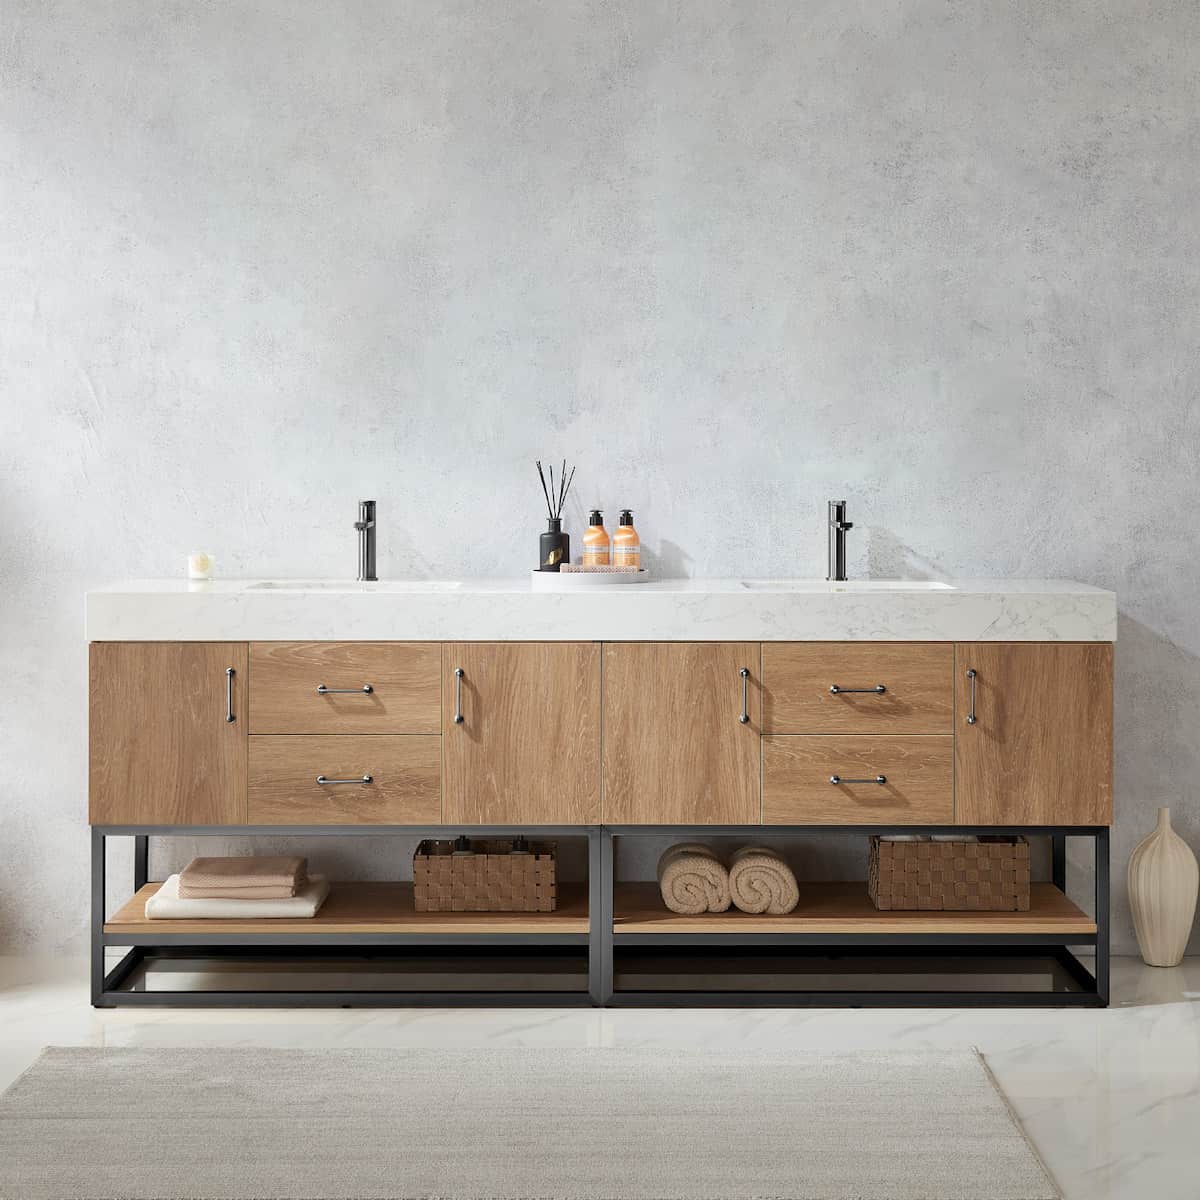 Vinnova Alistair 84 Inch Freestanding Double Vanity in North American Oak and Matte Black Frame with White Grain Stone Countertop Without Mirrors in Bathroom 789084B-NO-GW-NM